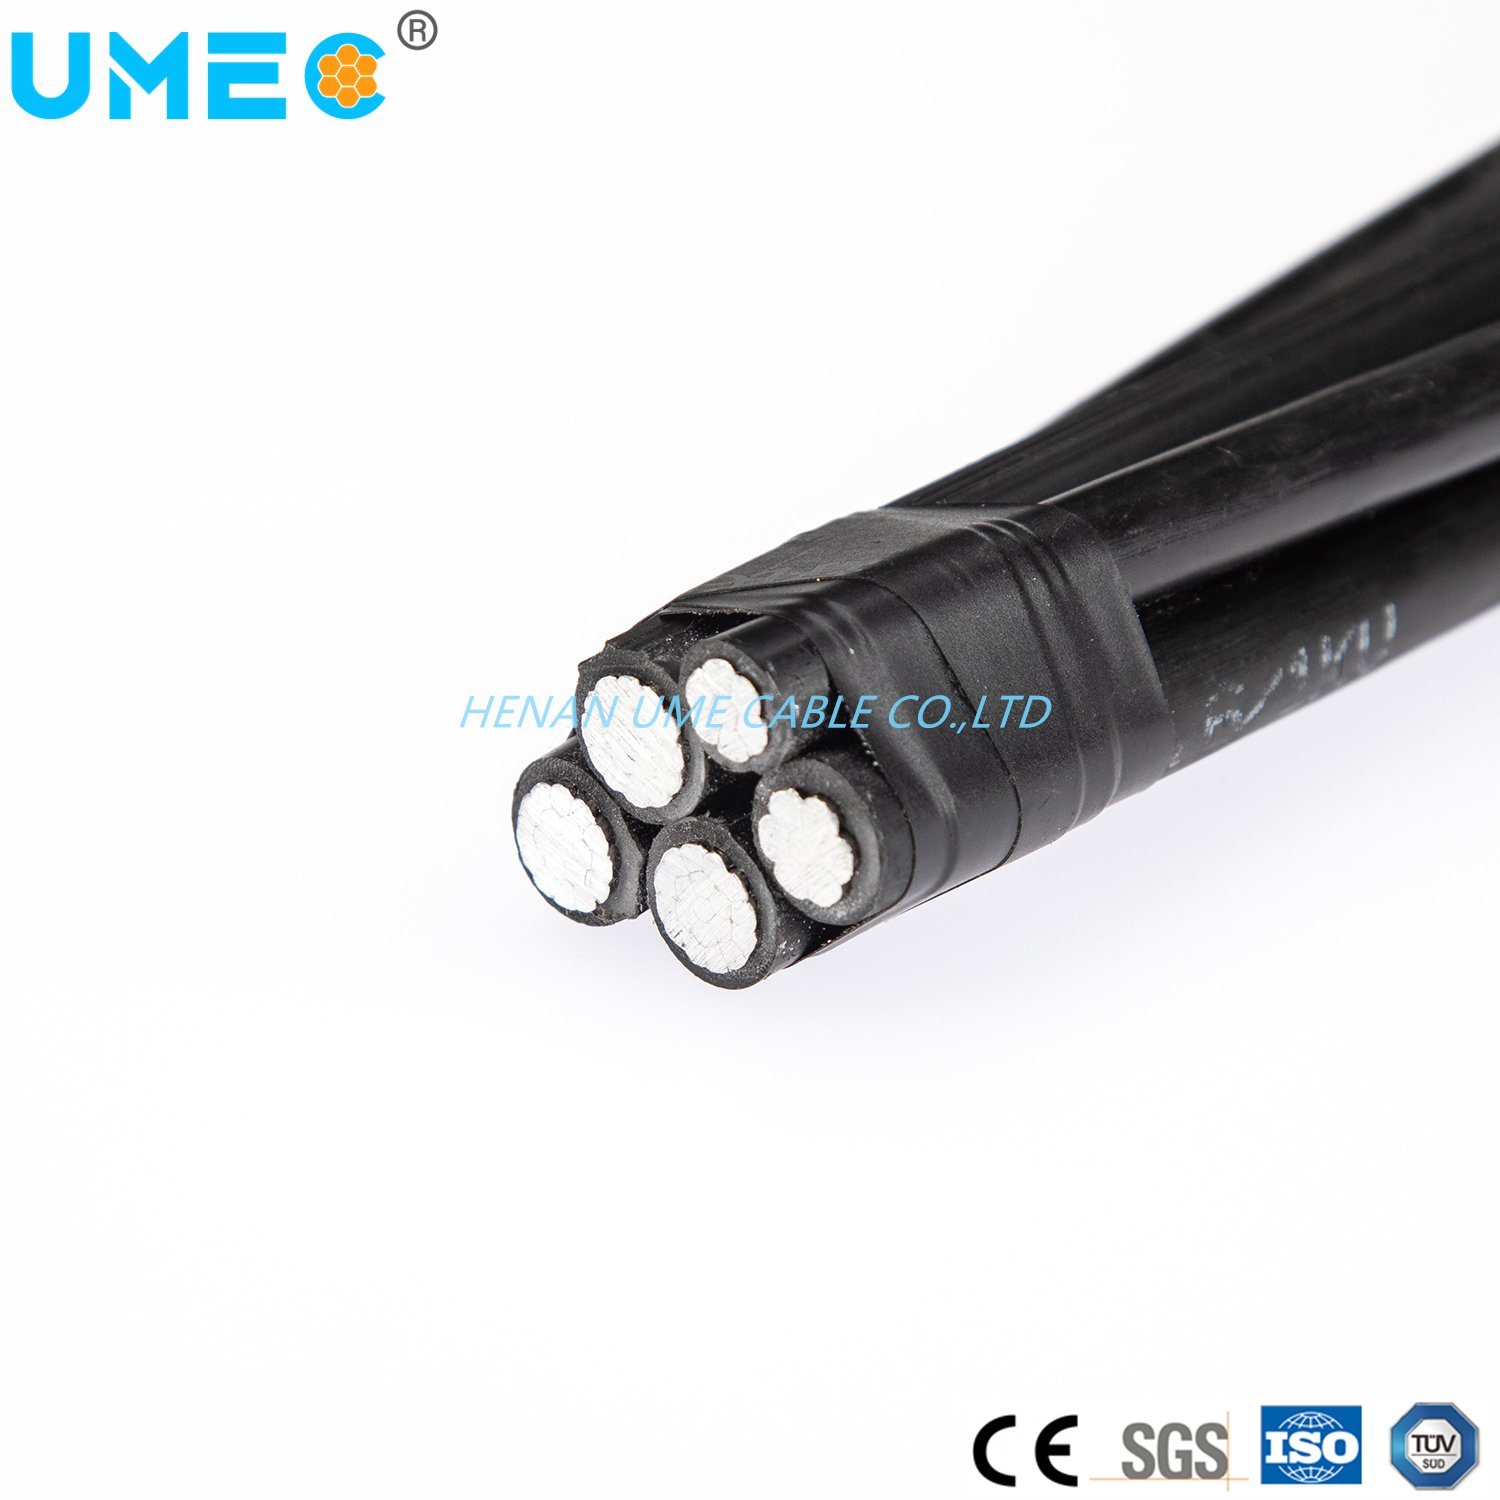 ABC Cable 0.6-1kv Aluminum Conductor Caai Cable / Self-Supporting Cable